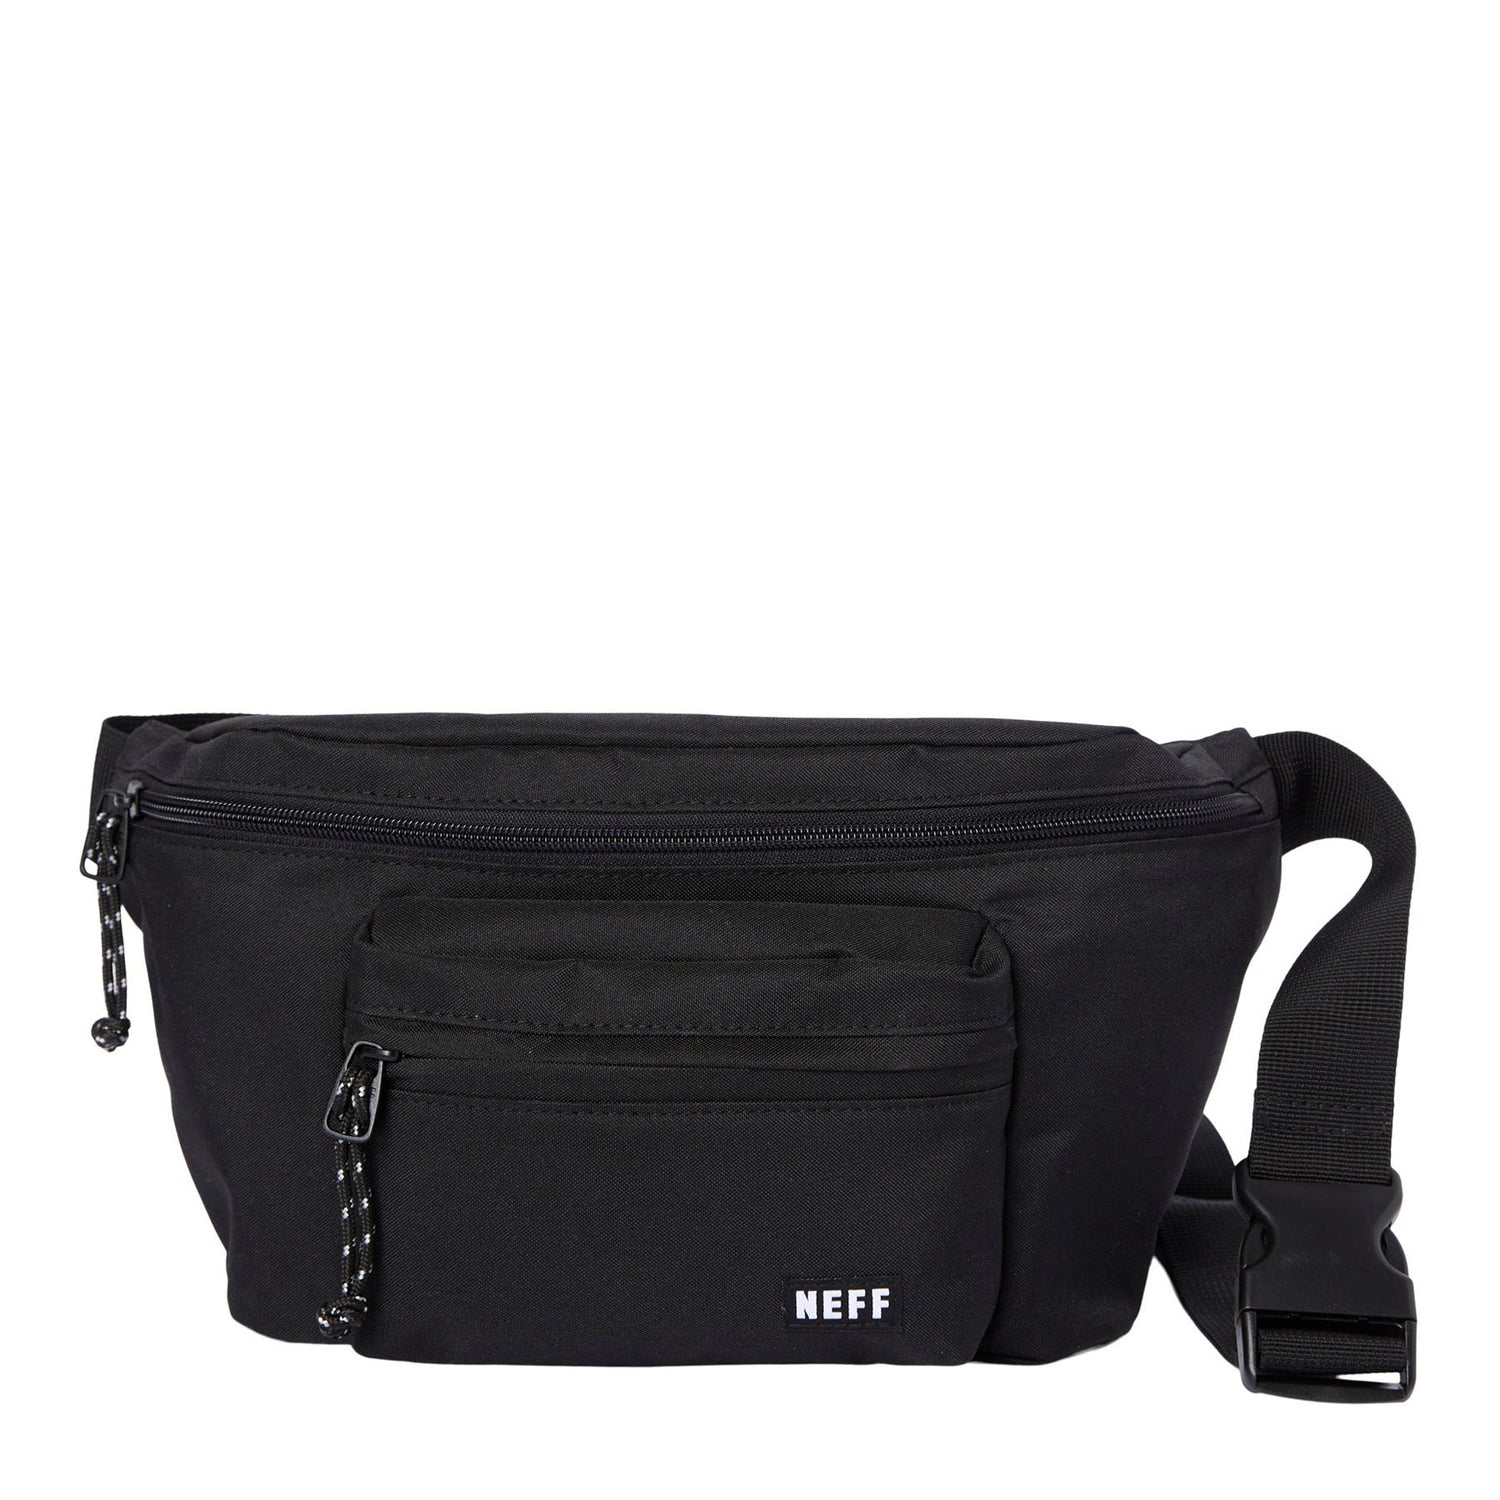 50% OFF - All Bags and Backpacks 🎒 - Neff Headwear